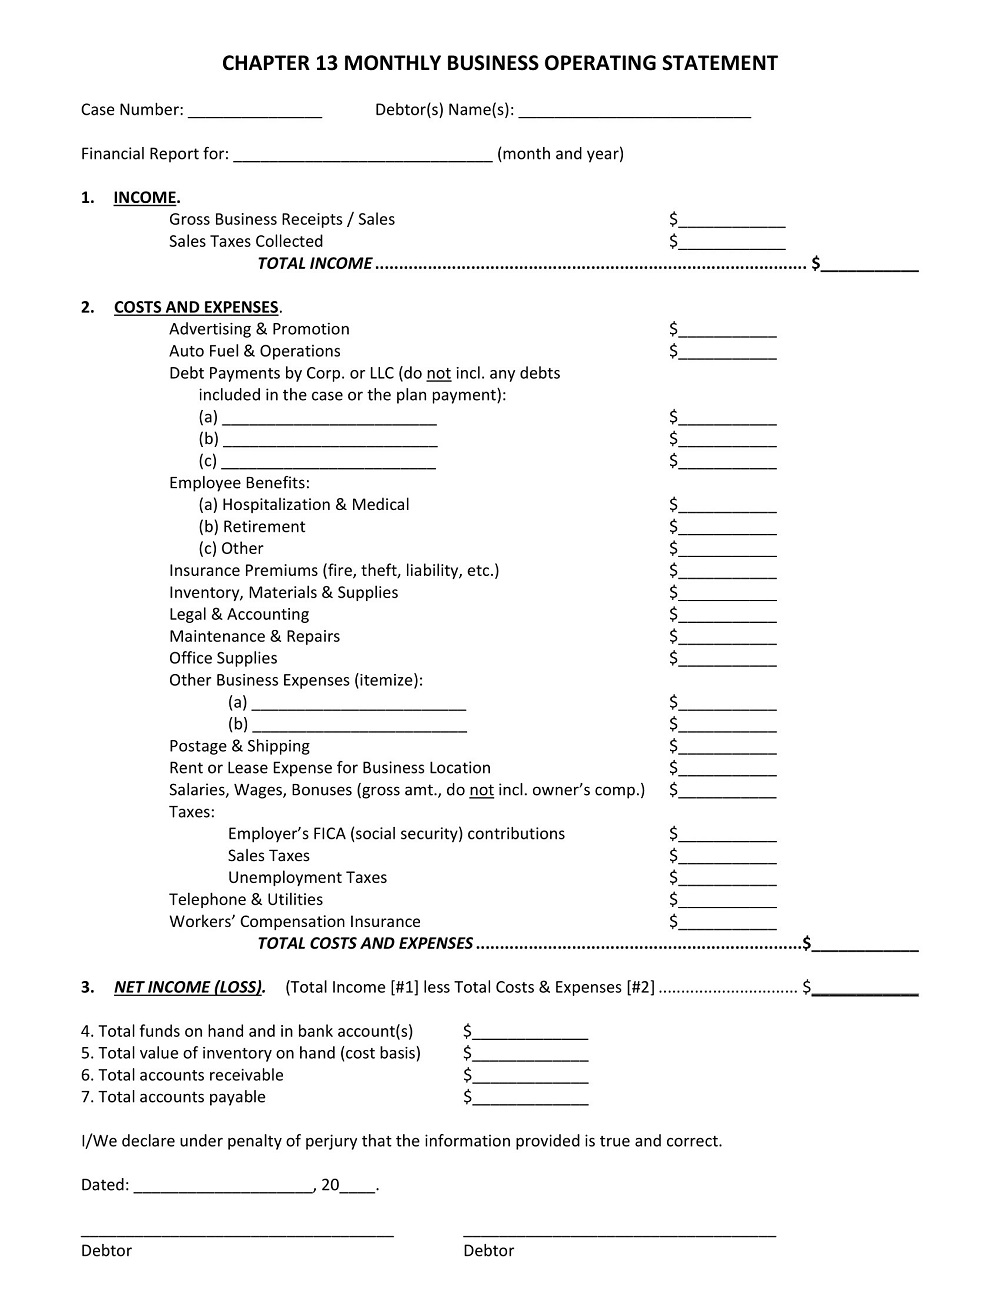 Monthly Business Operating Statement Template